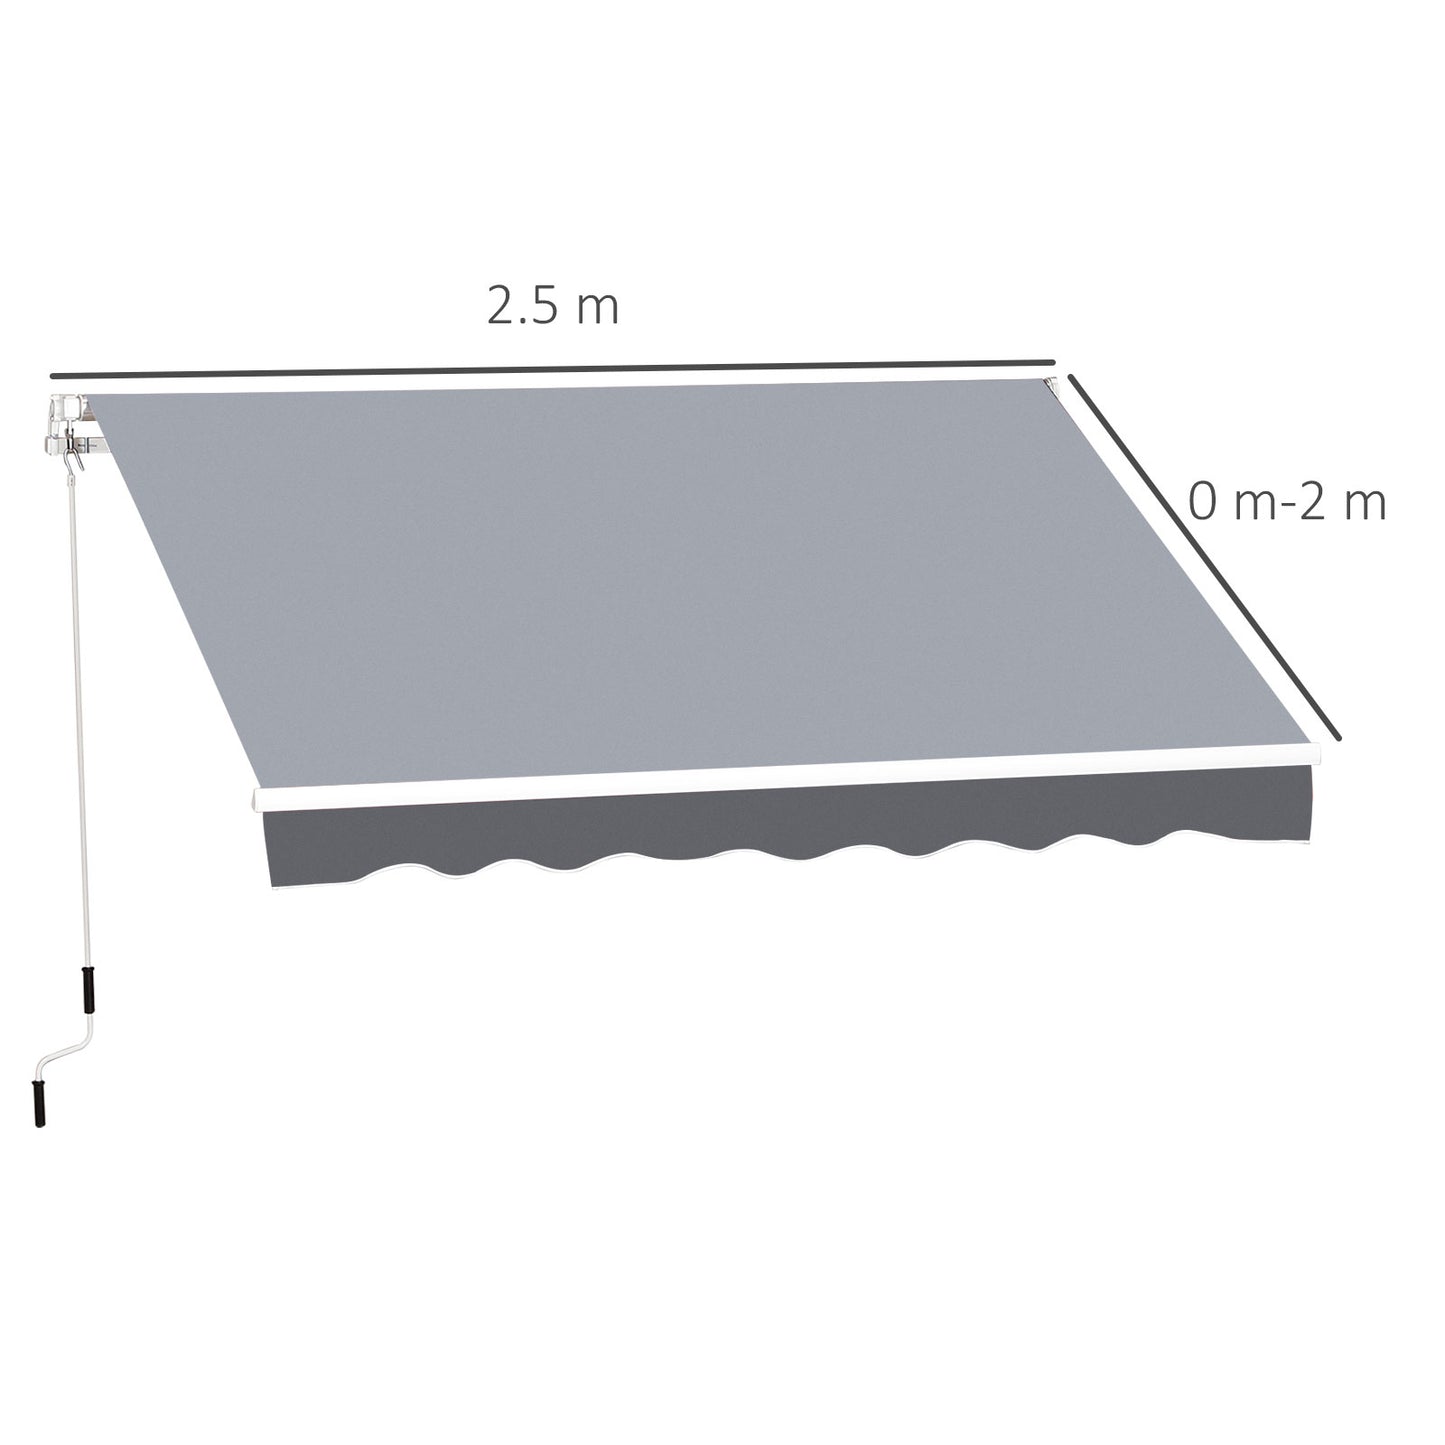 Outsunny 2.5m x 2m Garden Patio Manual Awning Canopy Sun Shade Shelter Retractable with Winding Handle Grey